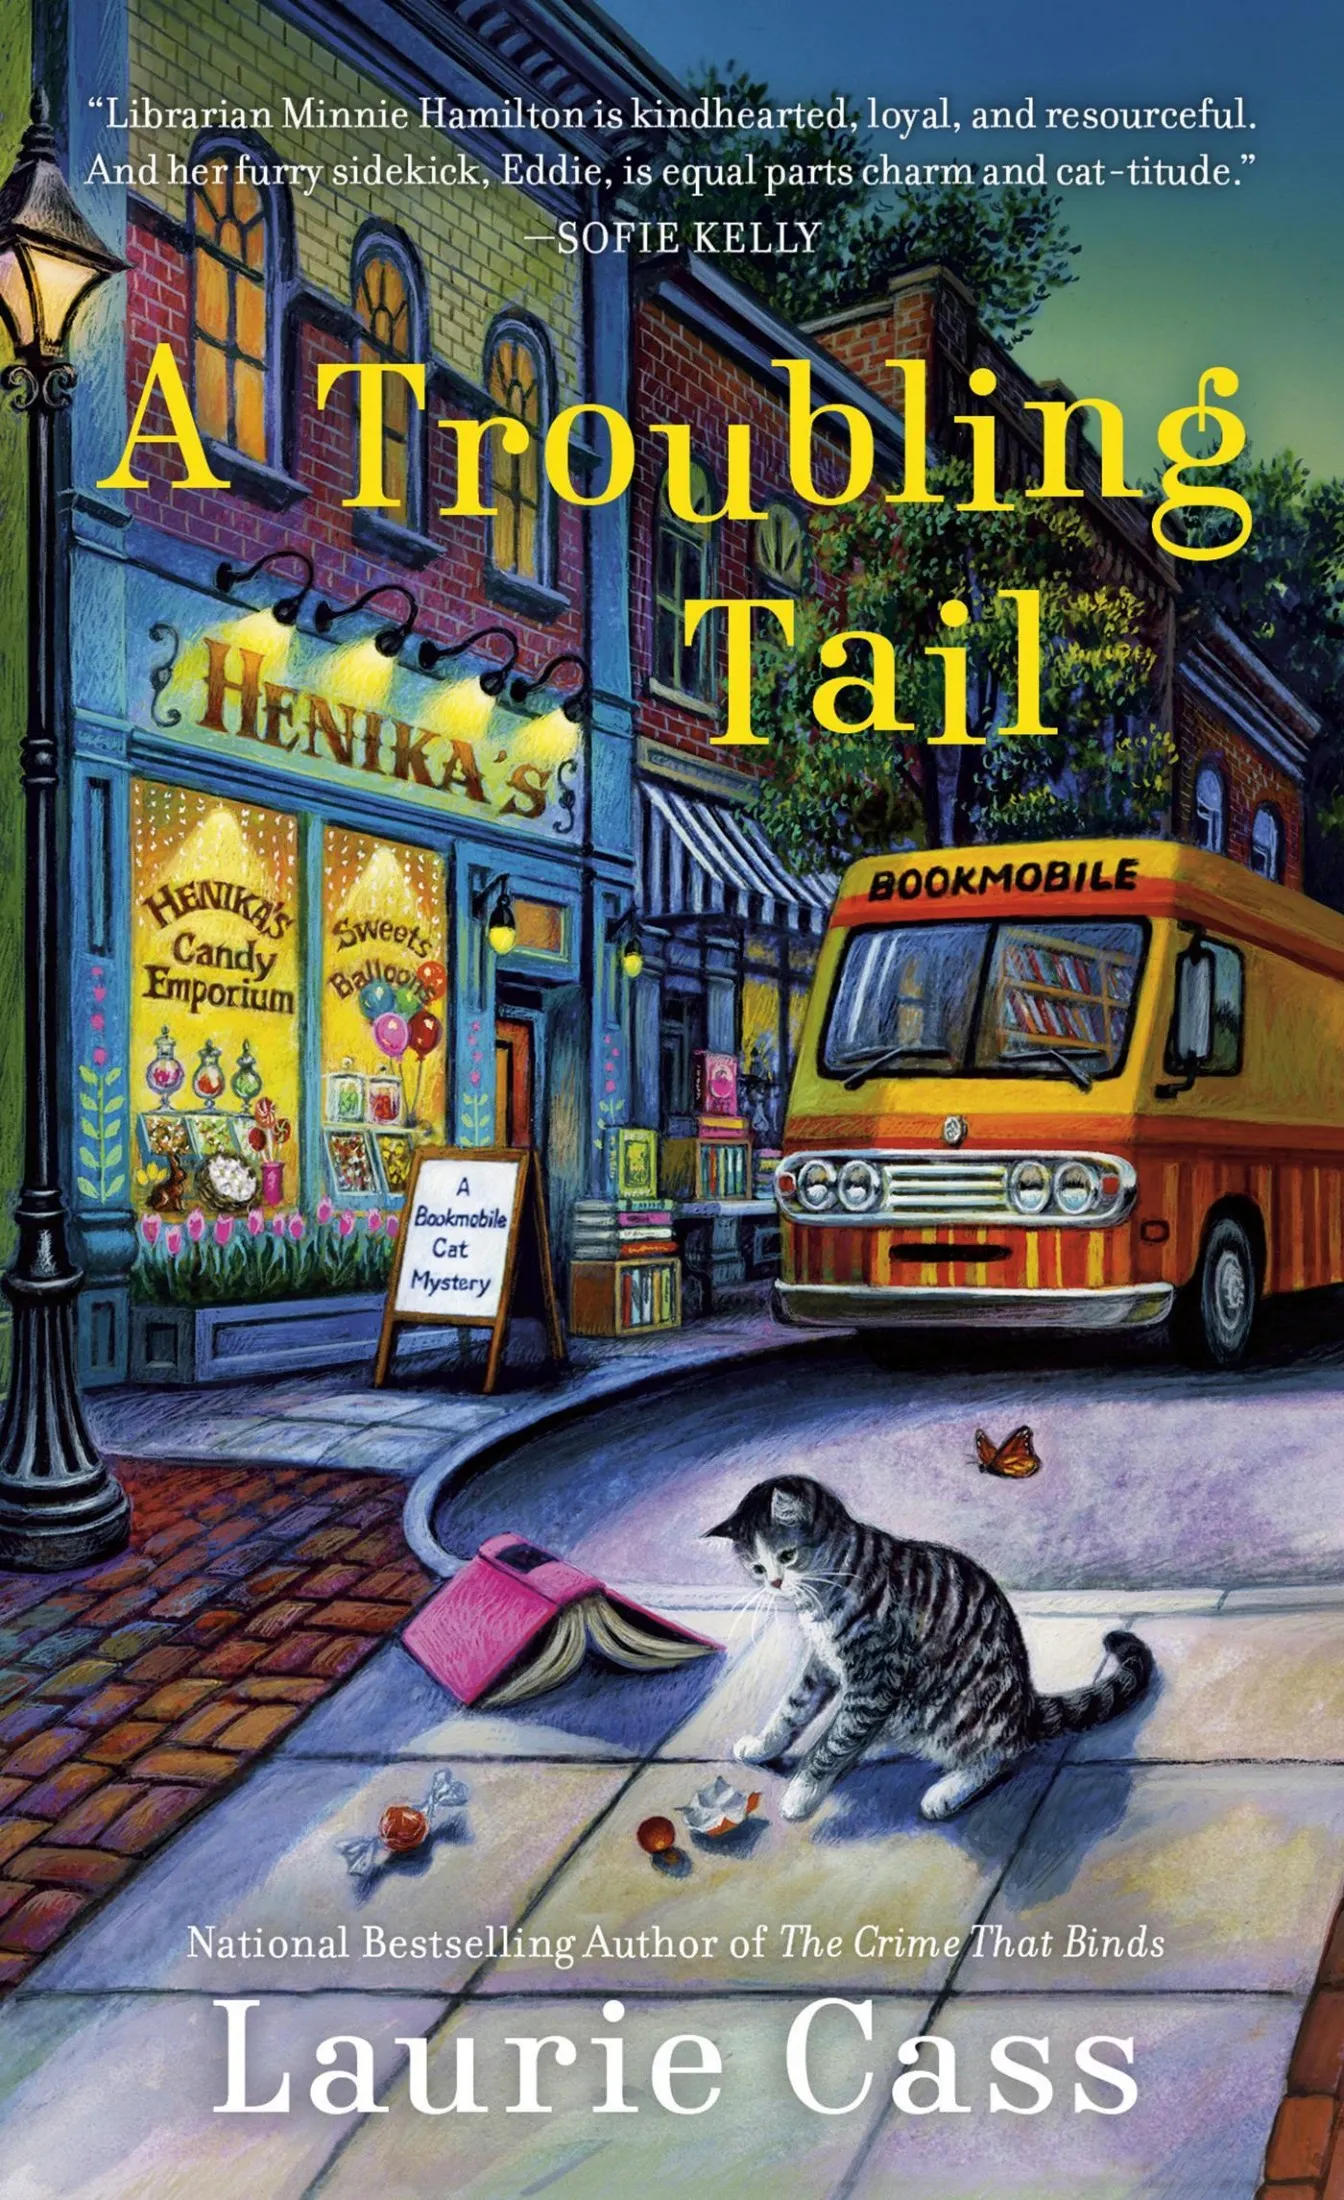 A Troubling Tail ( Bookmobile Cat Mystery #11)